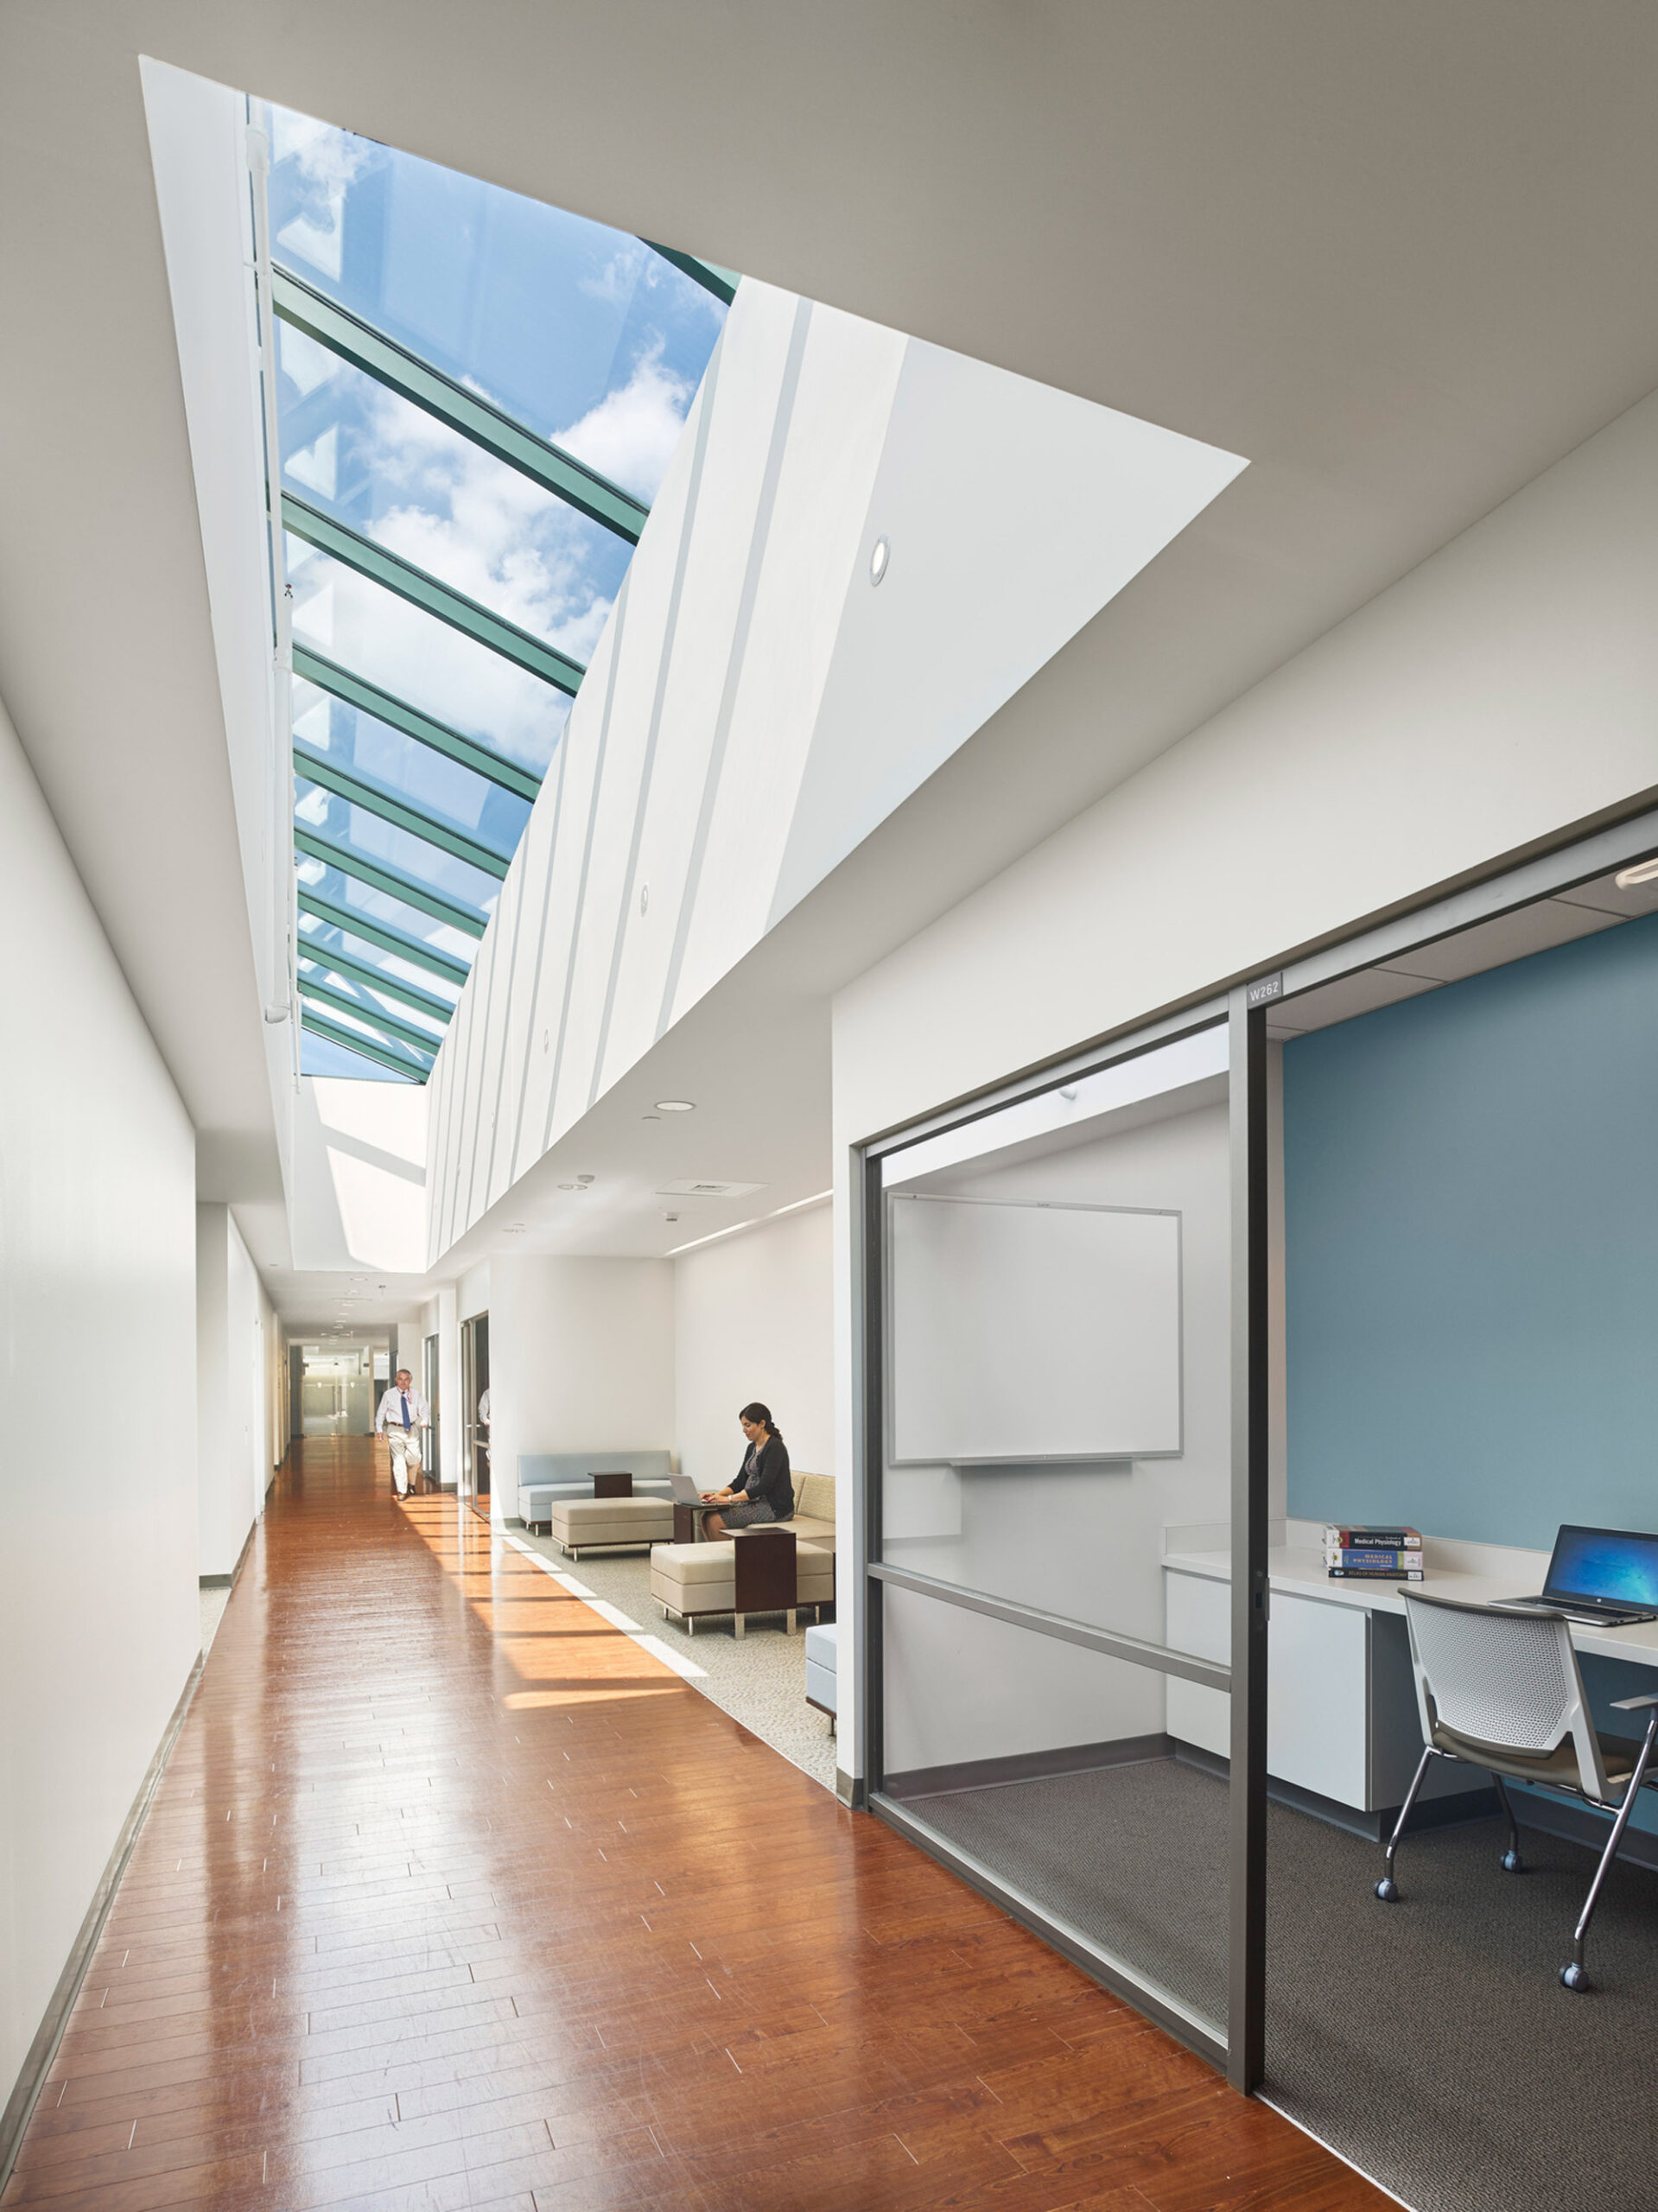 Skylight illuminates a modern hallway with sleek lines and warm wooden floors, juxtaposed against cool-hued walls and minimalist office furniture, accentuating the architectural interplay of light and space.